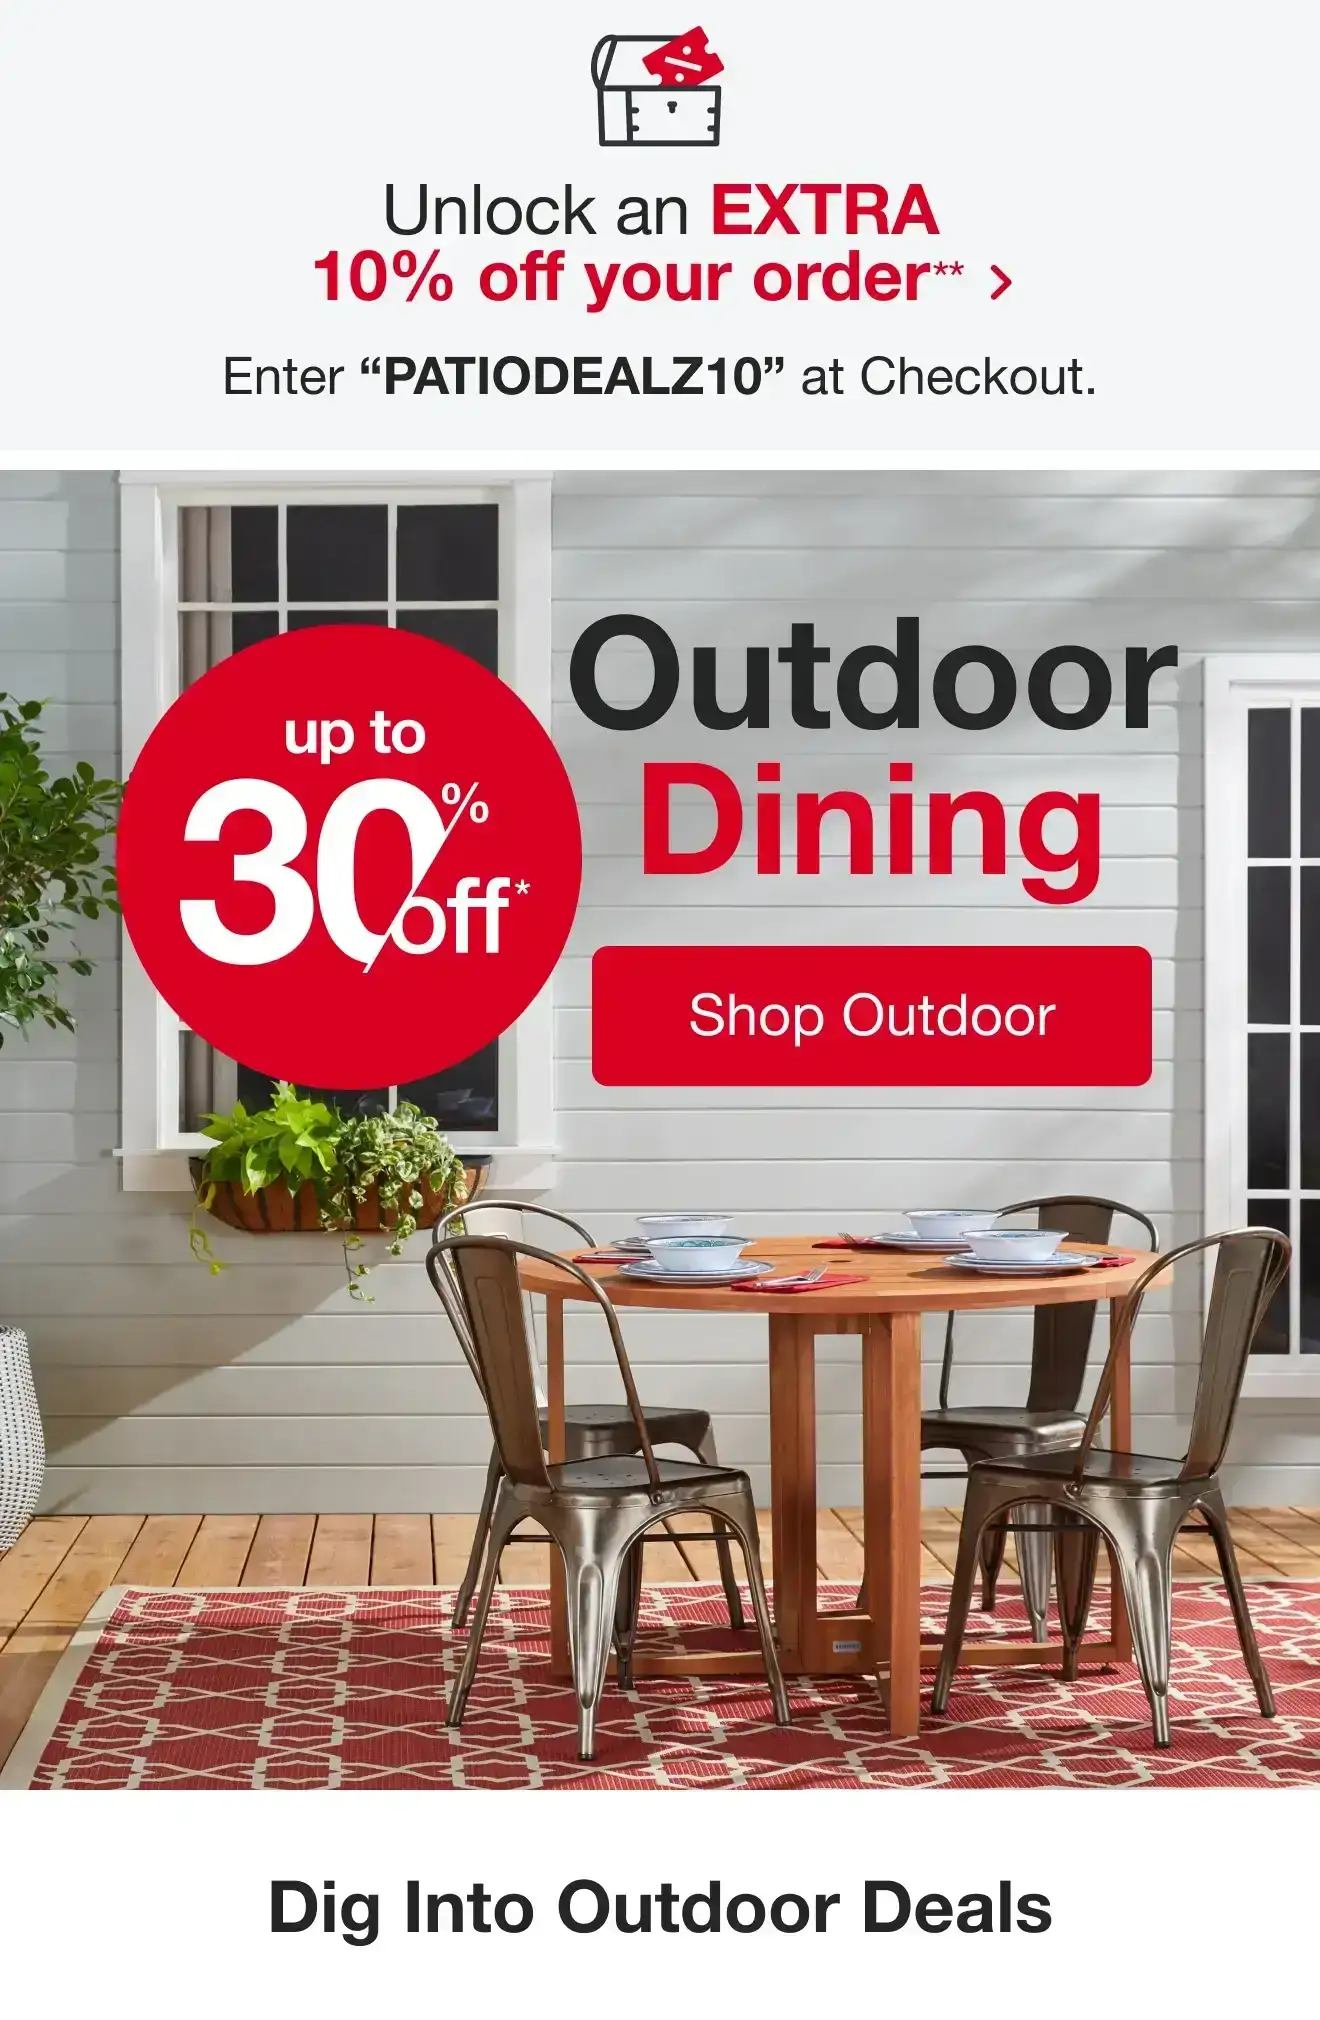 Take an additional 10% off your entire order with PATIODEALZ10 at checkout